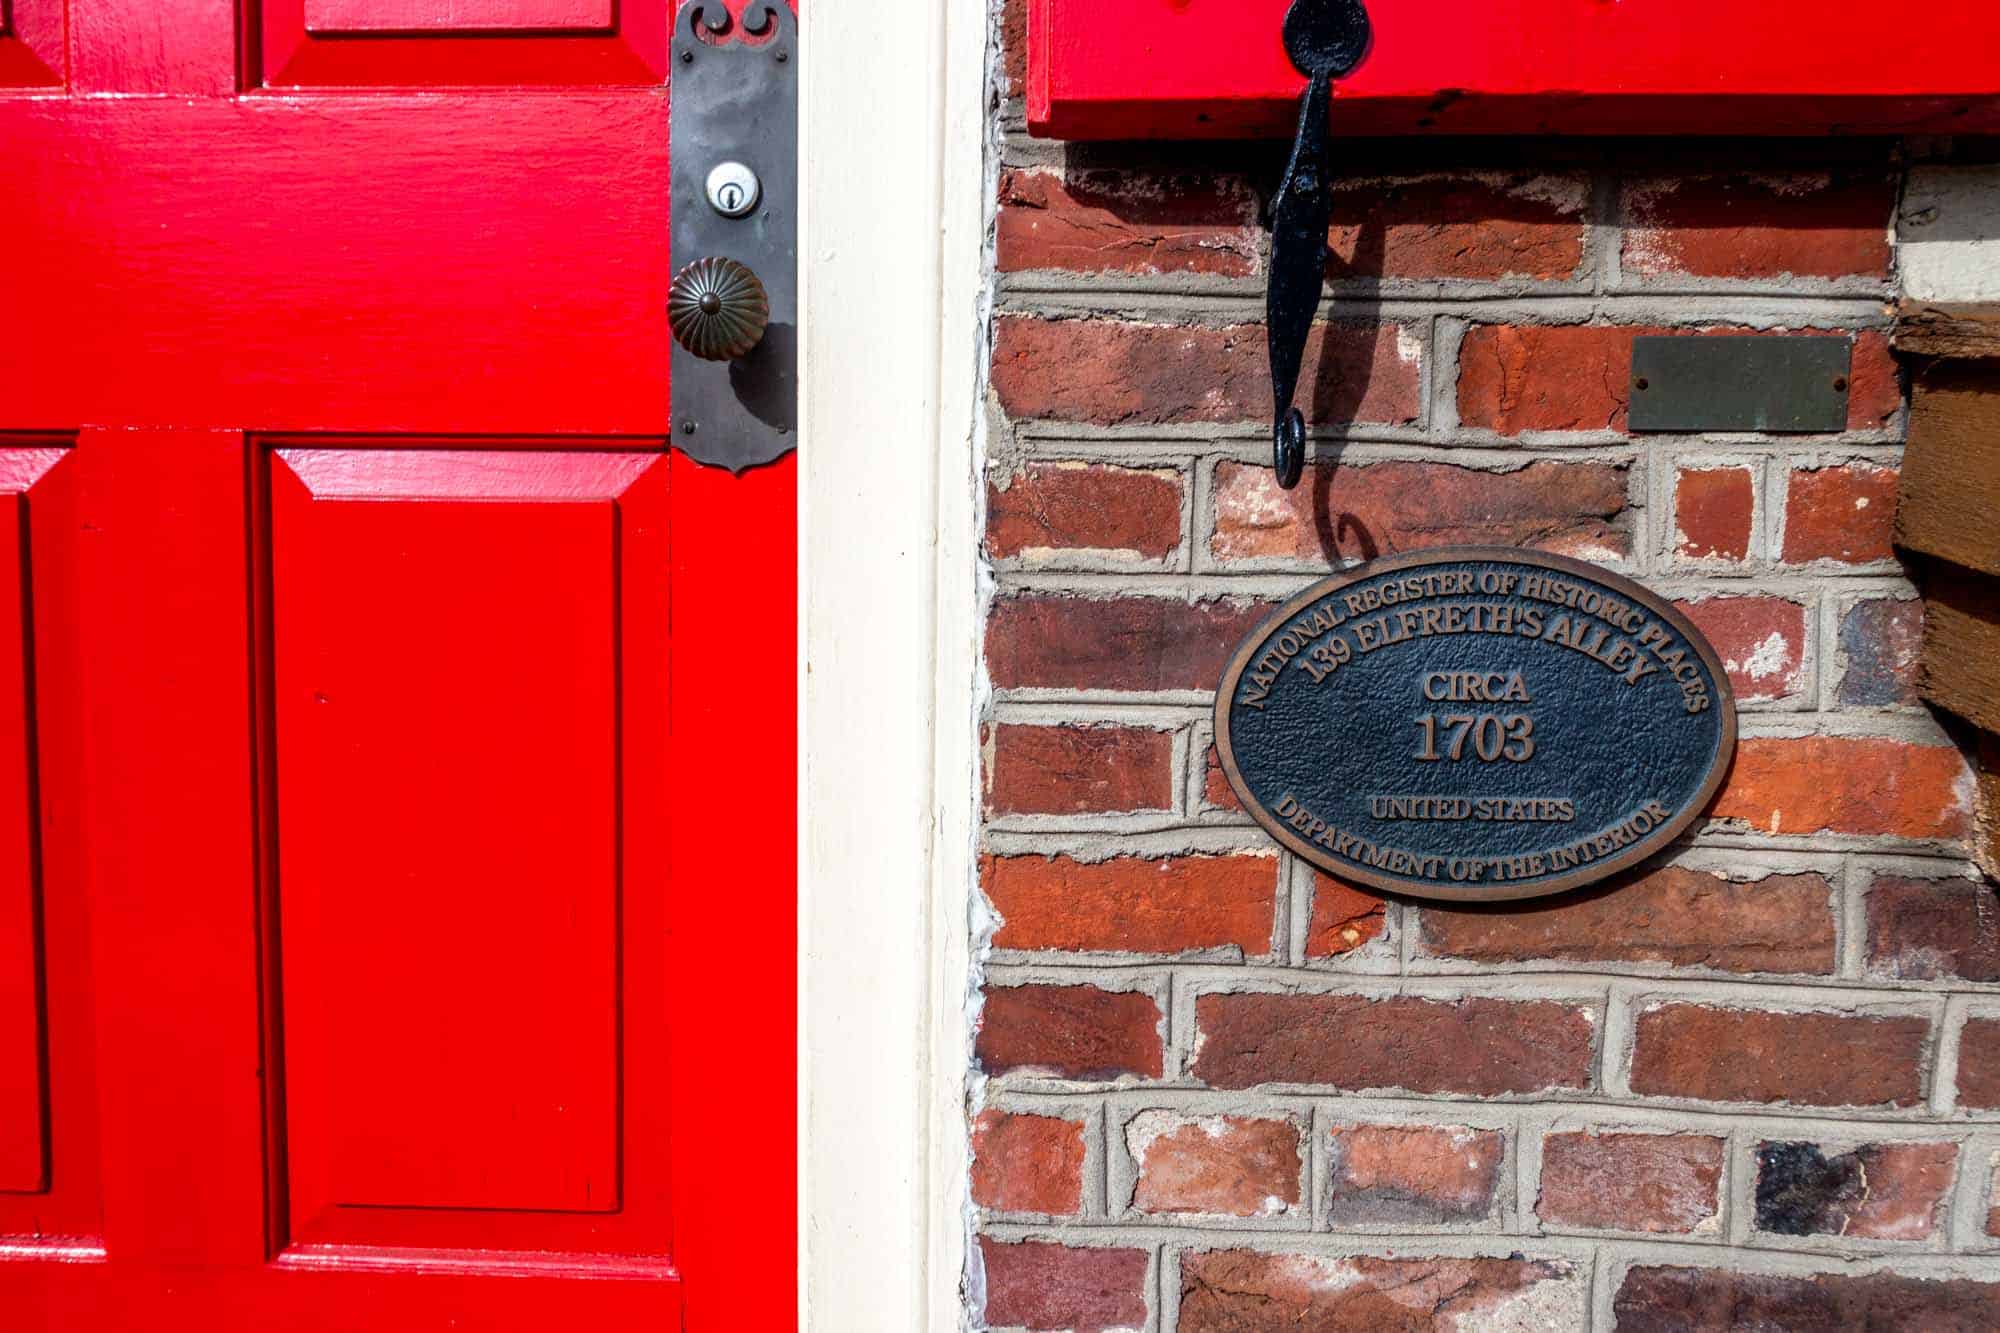 National Register of Historic Places plaque at 139 Elfreth's Alley, circa 1703